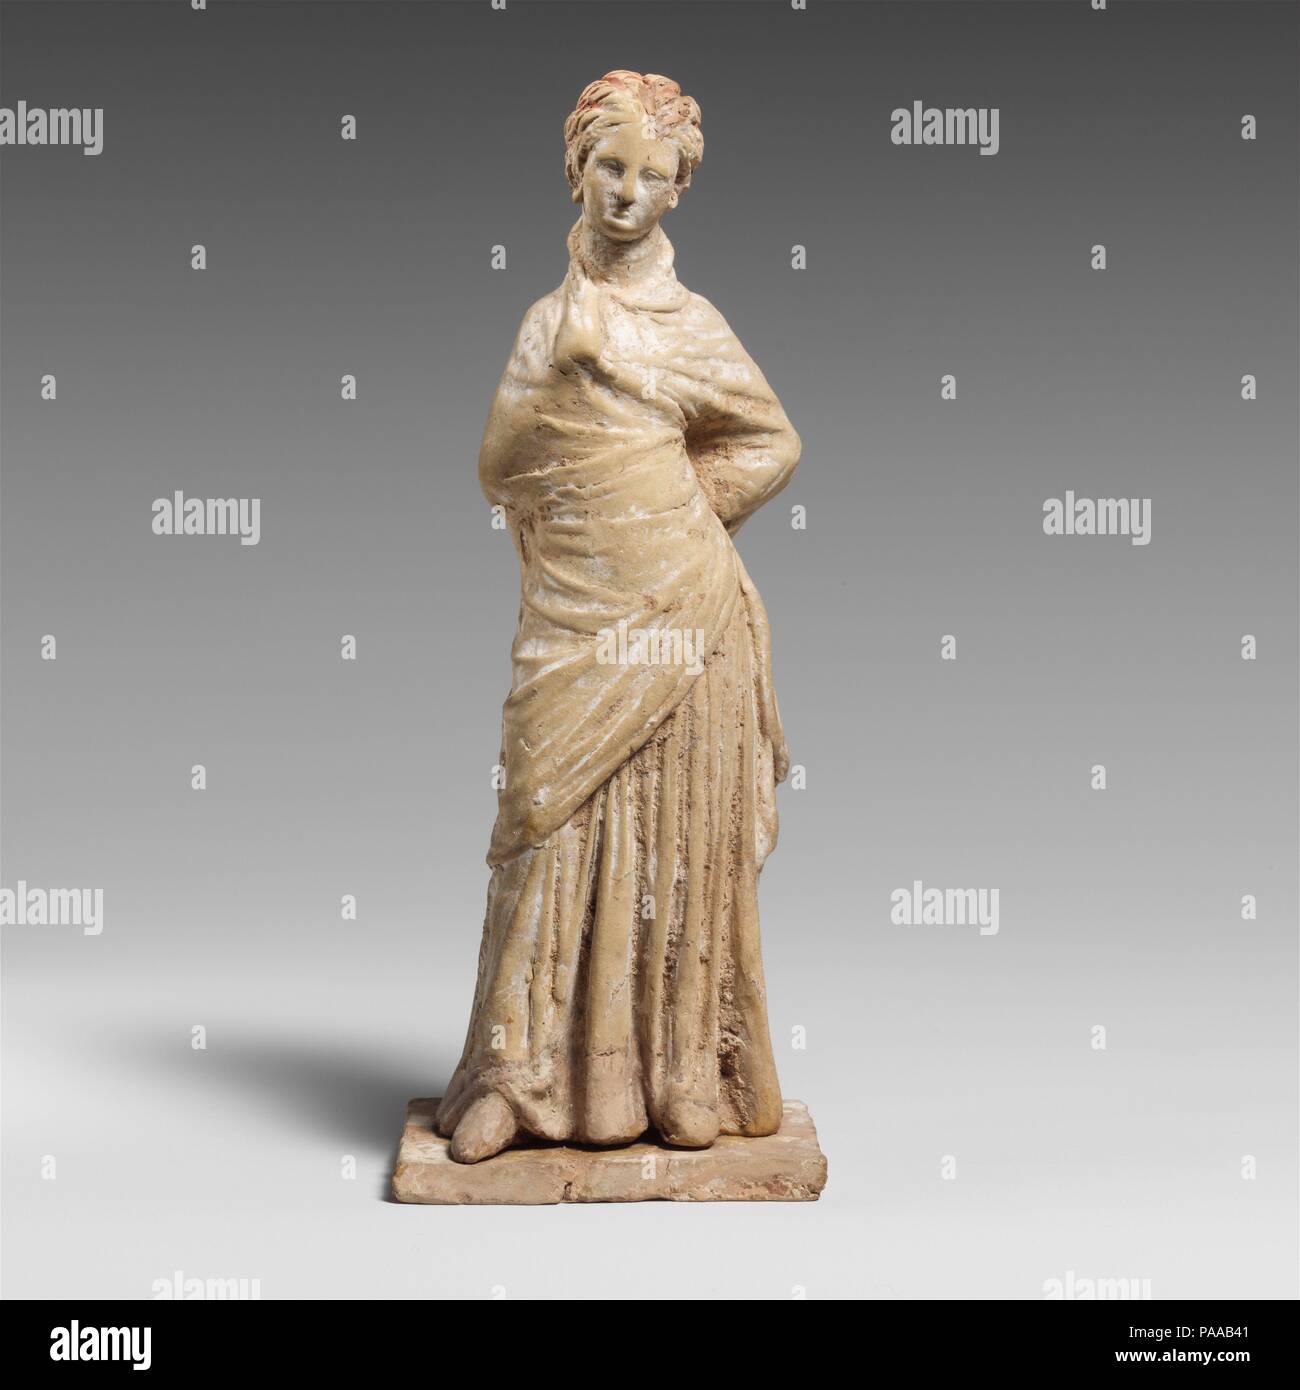 Terracotta statuette of a draped woman. Culture: Greek, Boeotian. Dimensions: H.: 6 7/16 in. (16.4 cm). Date: mid-3rd century B.C..  The play of this lady's drapery is enlivened by her right arm bent under her garment and her left arm held akimbo. Considerable color is preserved on her hair. Museum: Metropolitan Museum of Art, New York, USA. Stock Photo